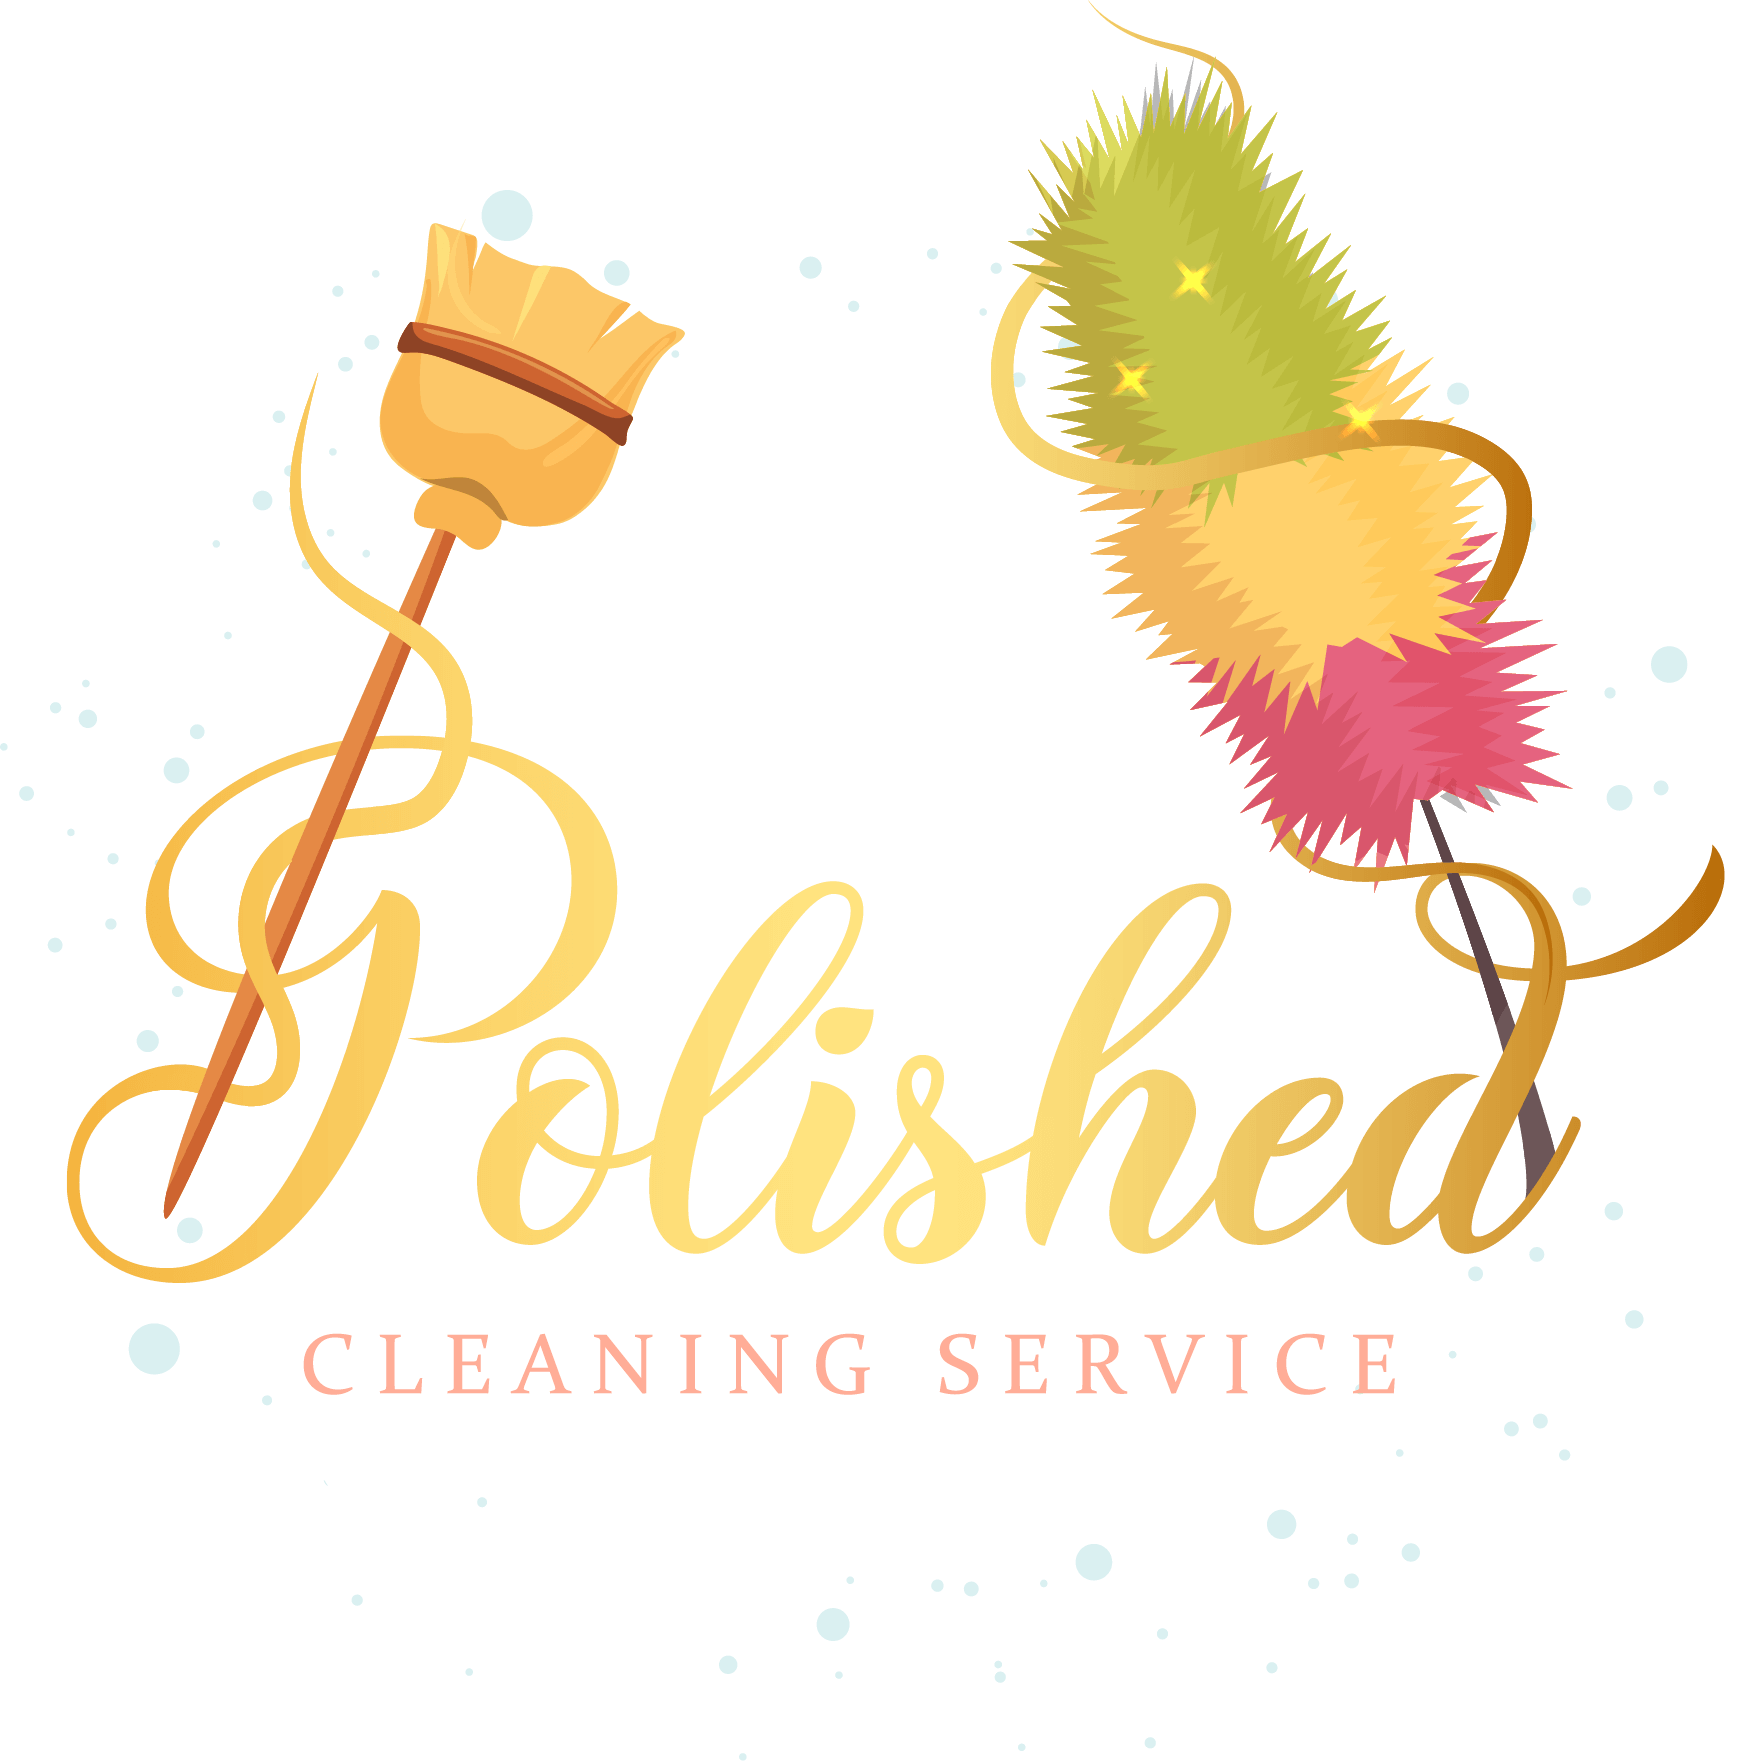 Polished Cleaning